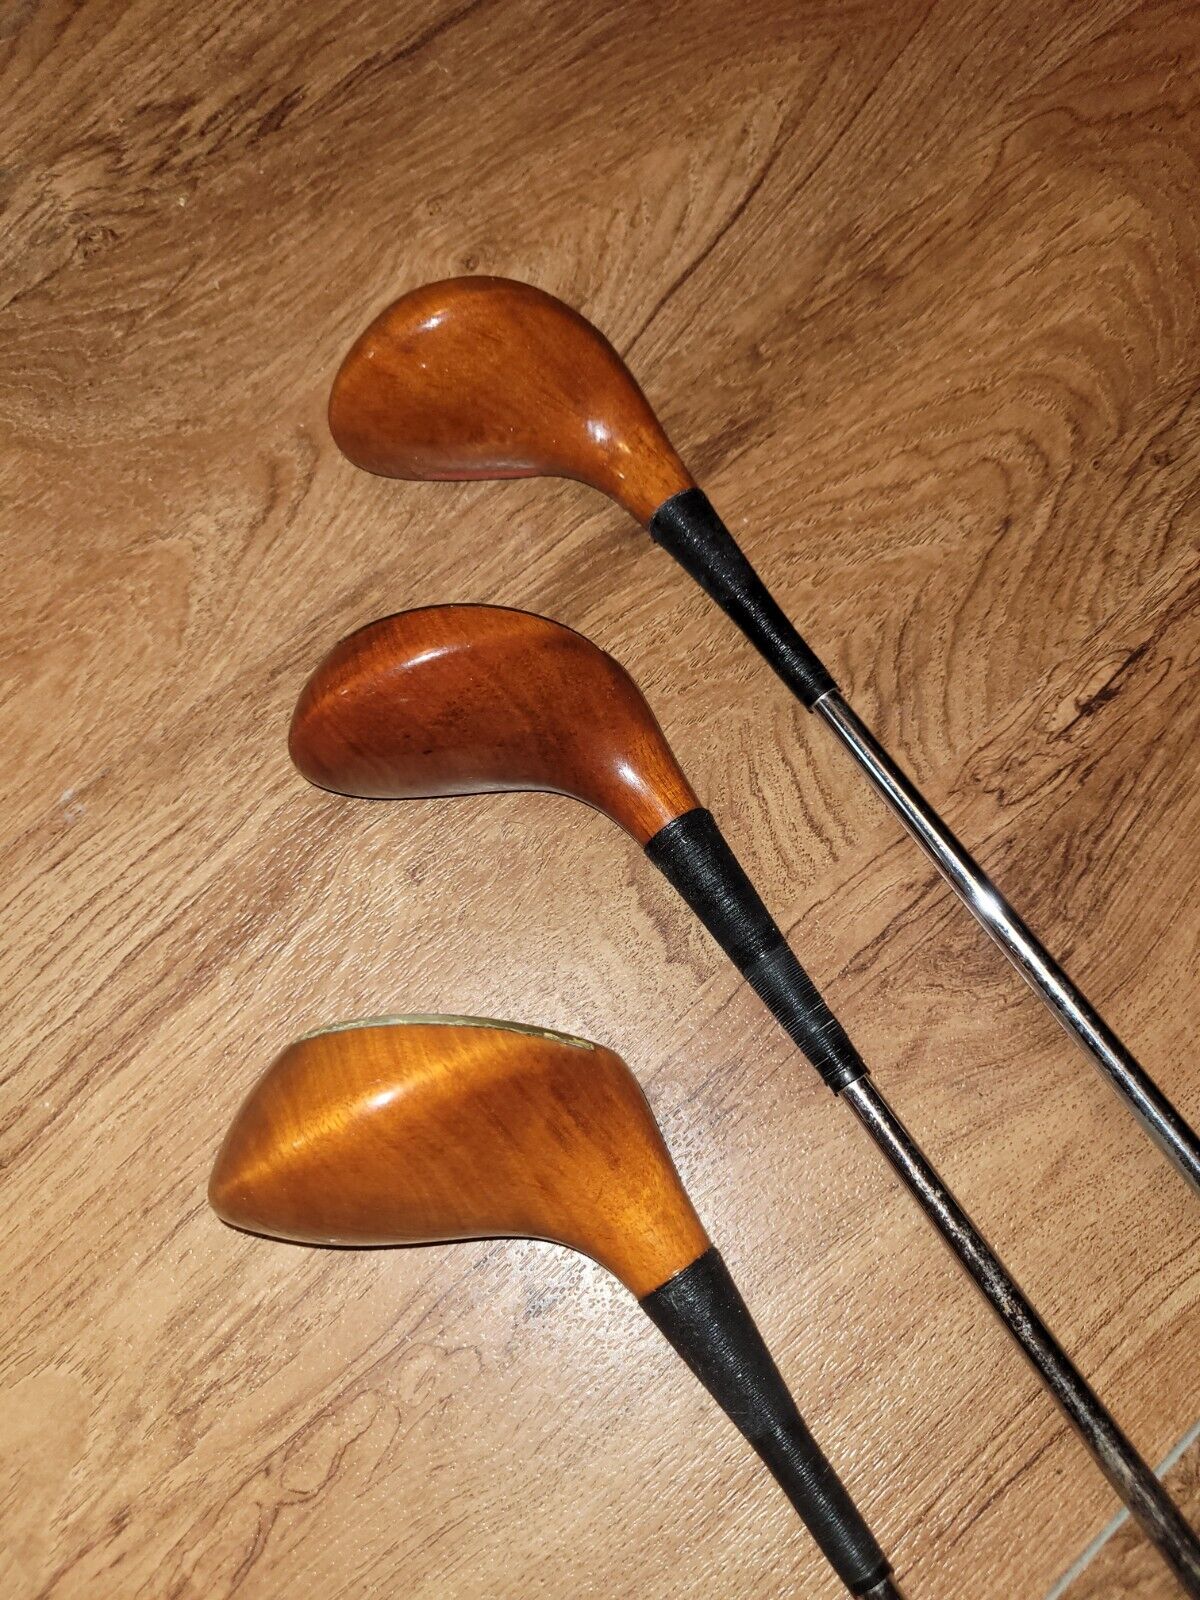 Vintage Golf Clubs, Tommy Armour Persimmon Woods Set, Driver 1. 4, 5